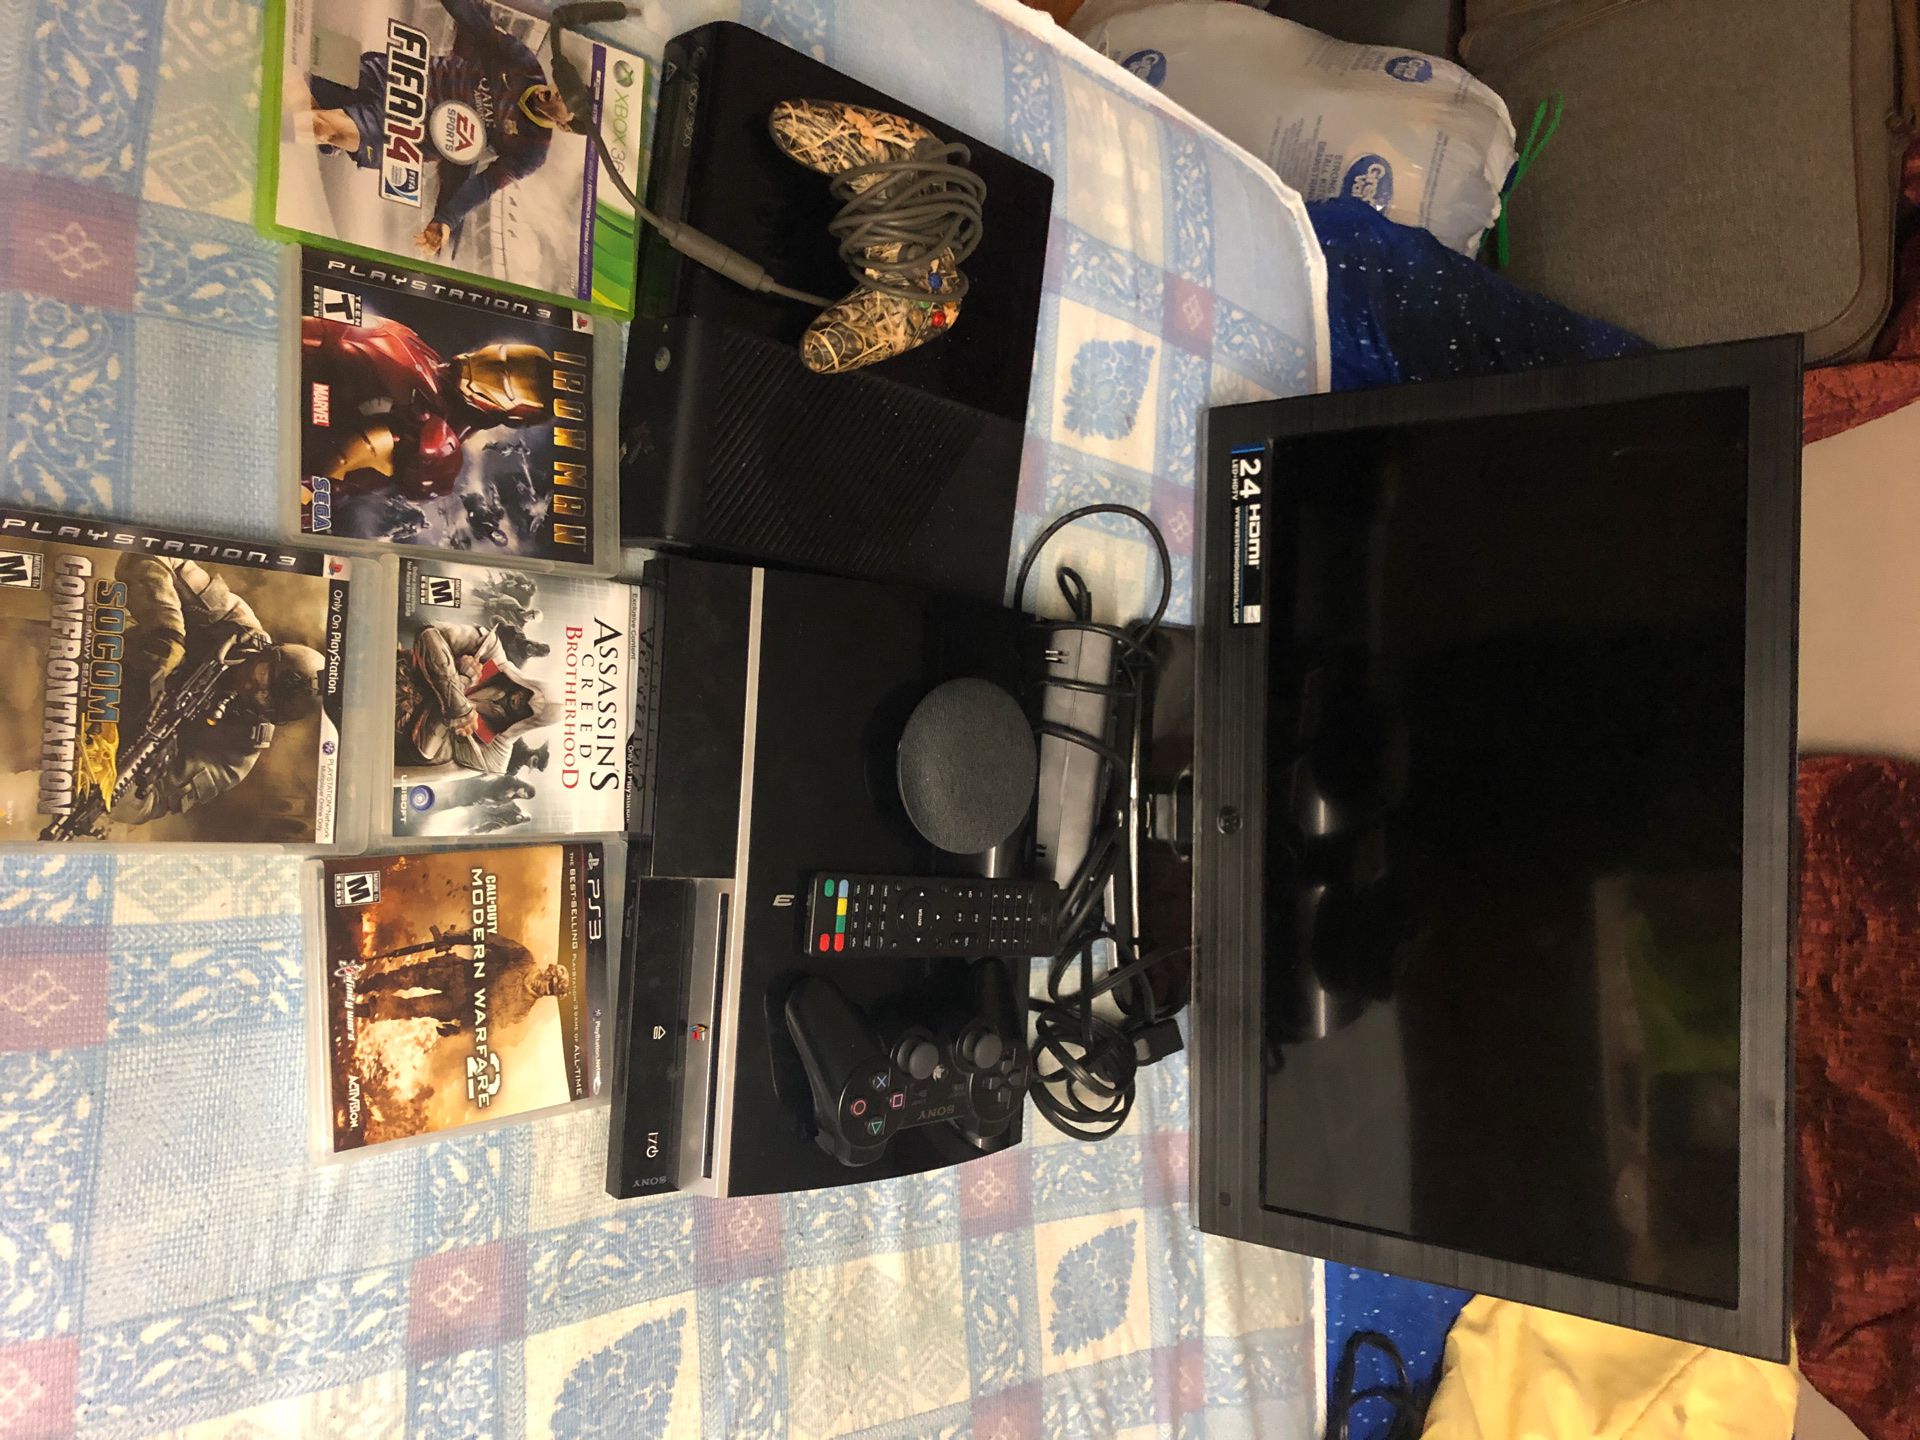 Ps3 Power cable controller and Iron Man call of duty and more games game Xbox 360 E comes with power cord wired controller and FIFA 14 and comes with